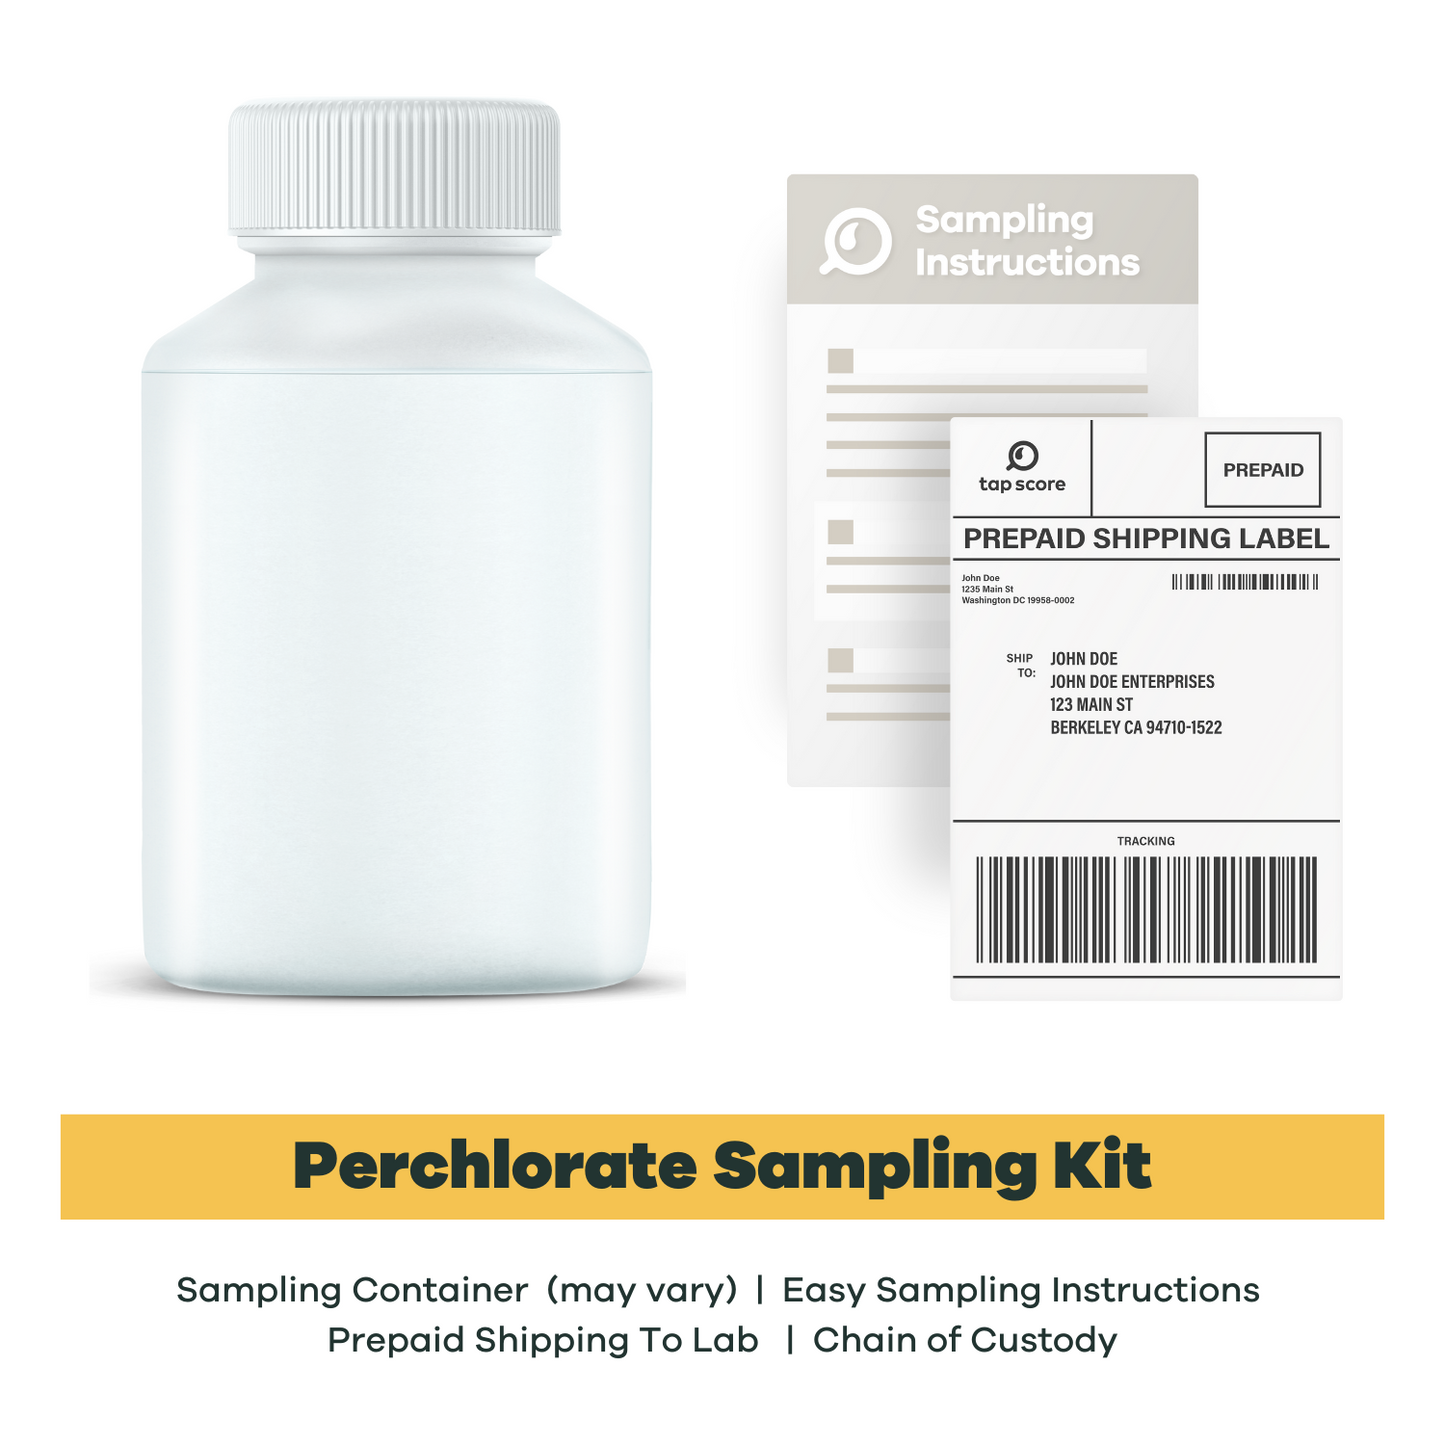 Perchlorate in Drinking Water Sampling Kit Containers